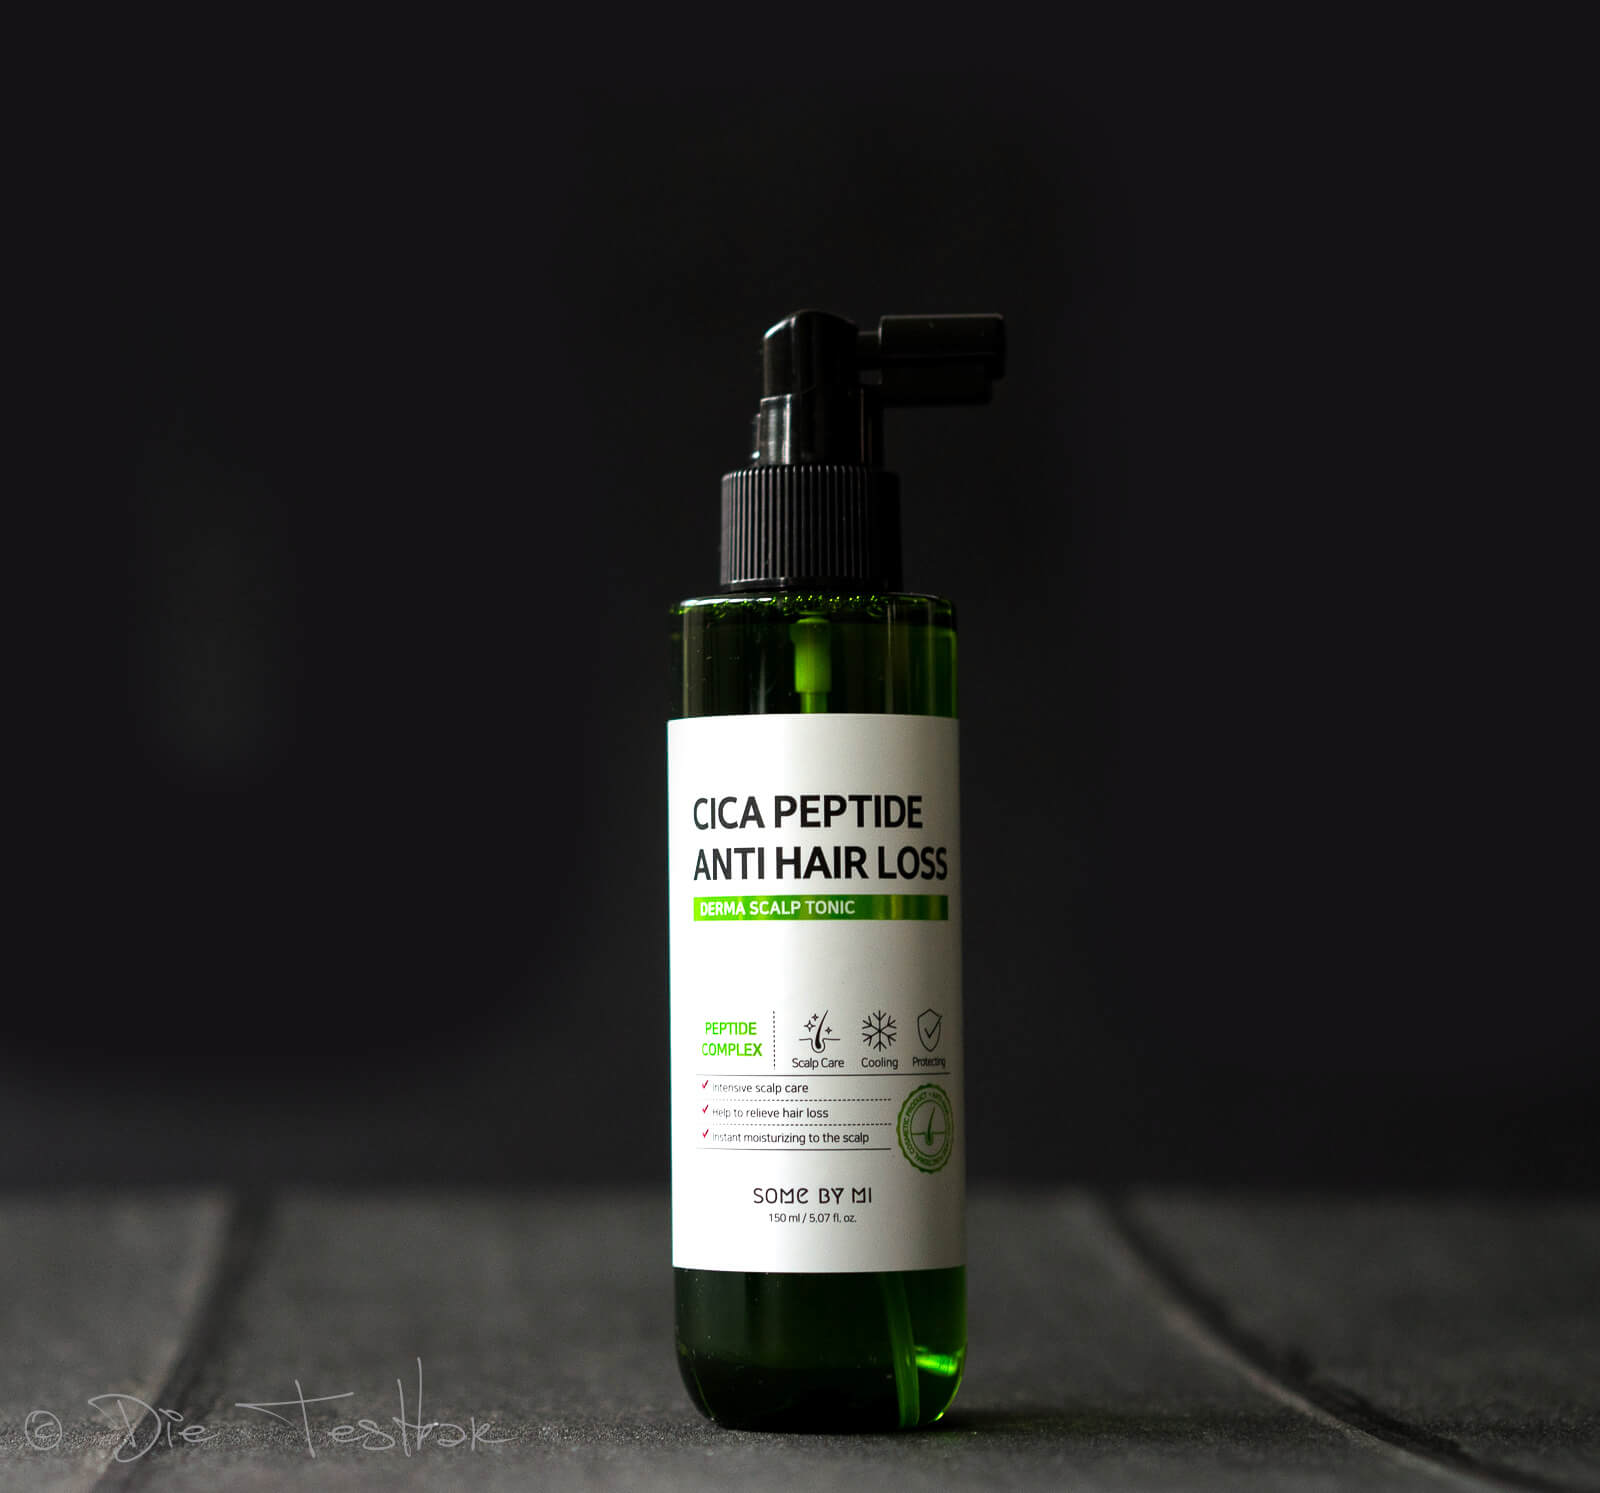 SOME BY MI - Cica Peptide Anti Hair Loss Derma Scalp Tonic